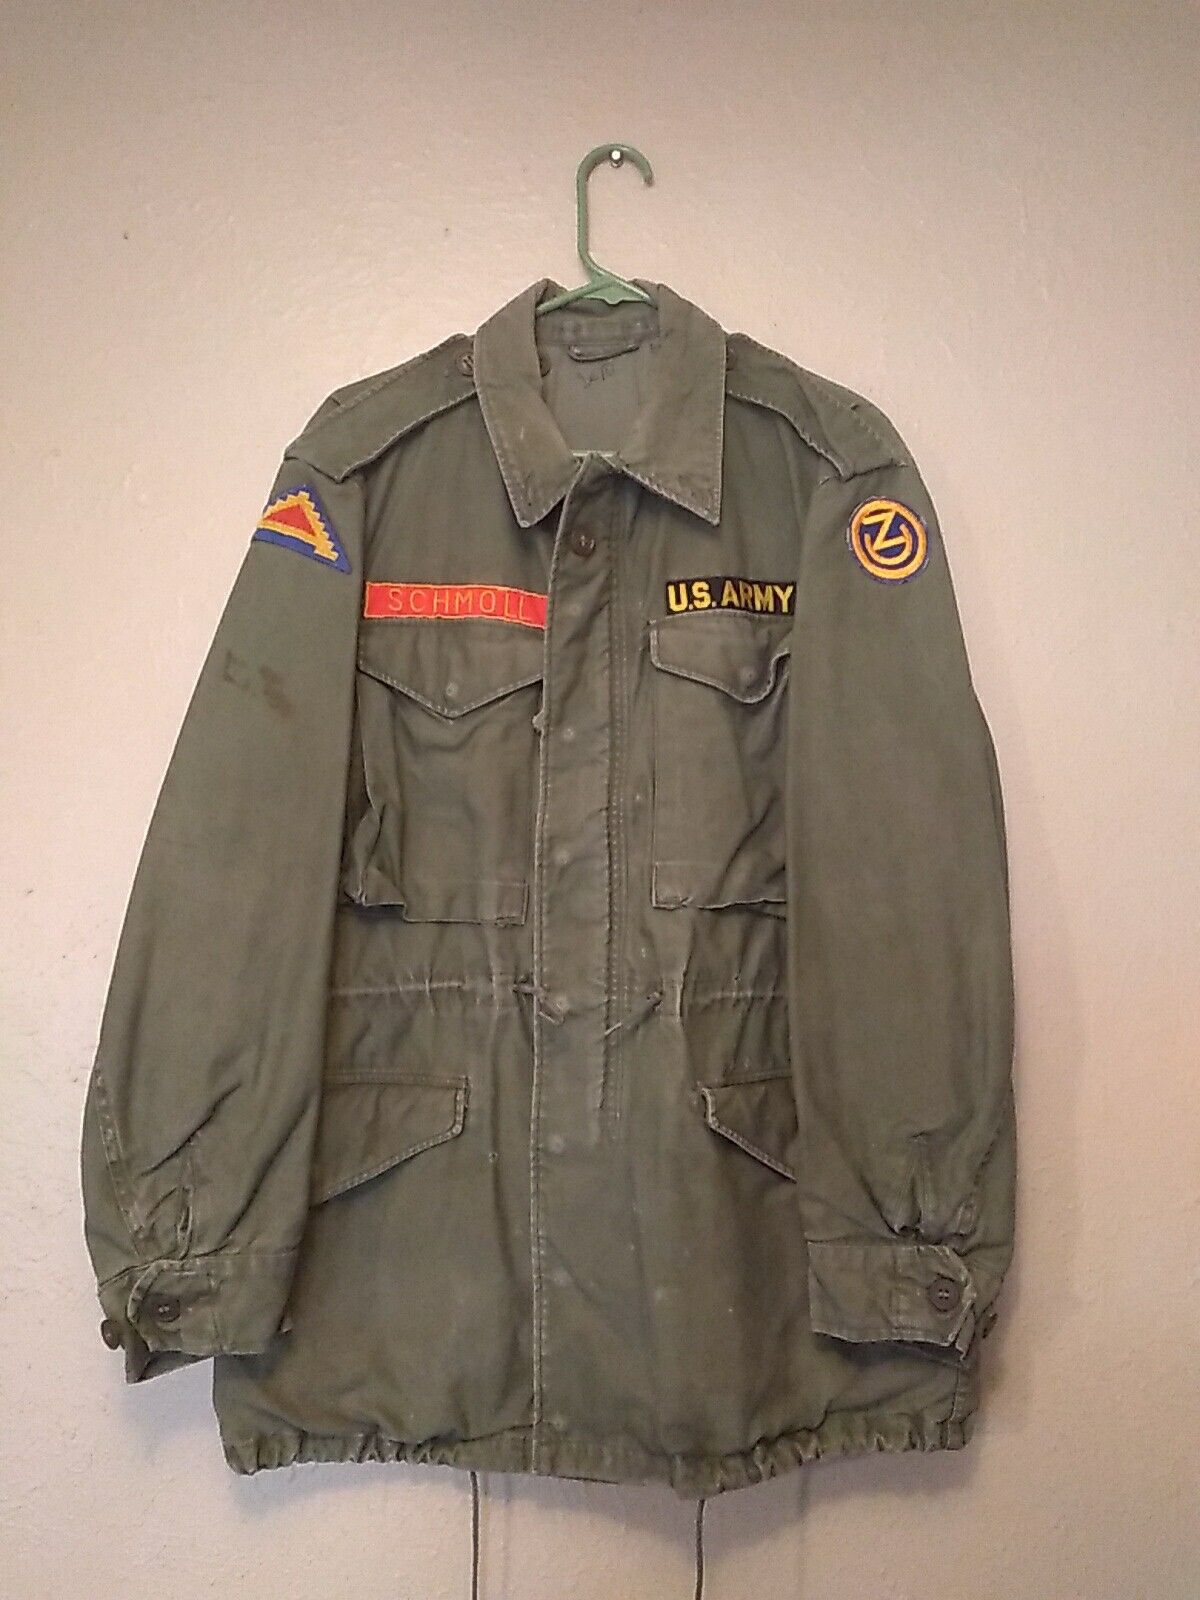 M-1951 FIELD JACKET FAIR TO GOOD USED CONDITION PATCHES & NAMED ORIGINAL MEDIUM